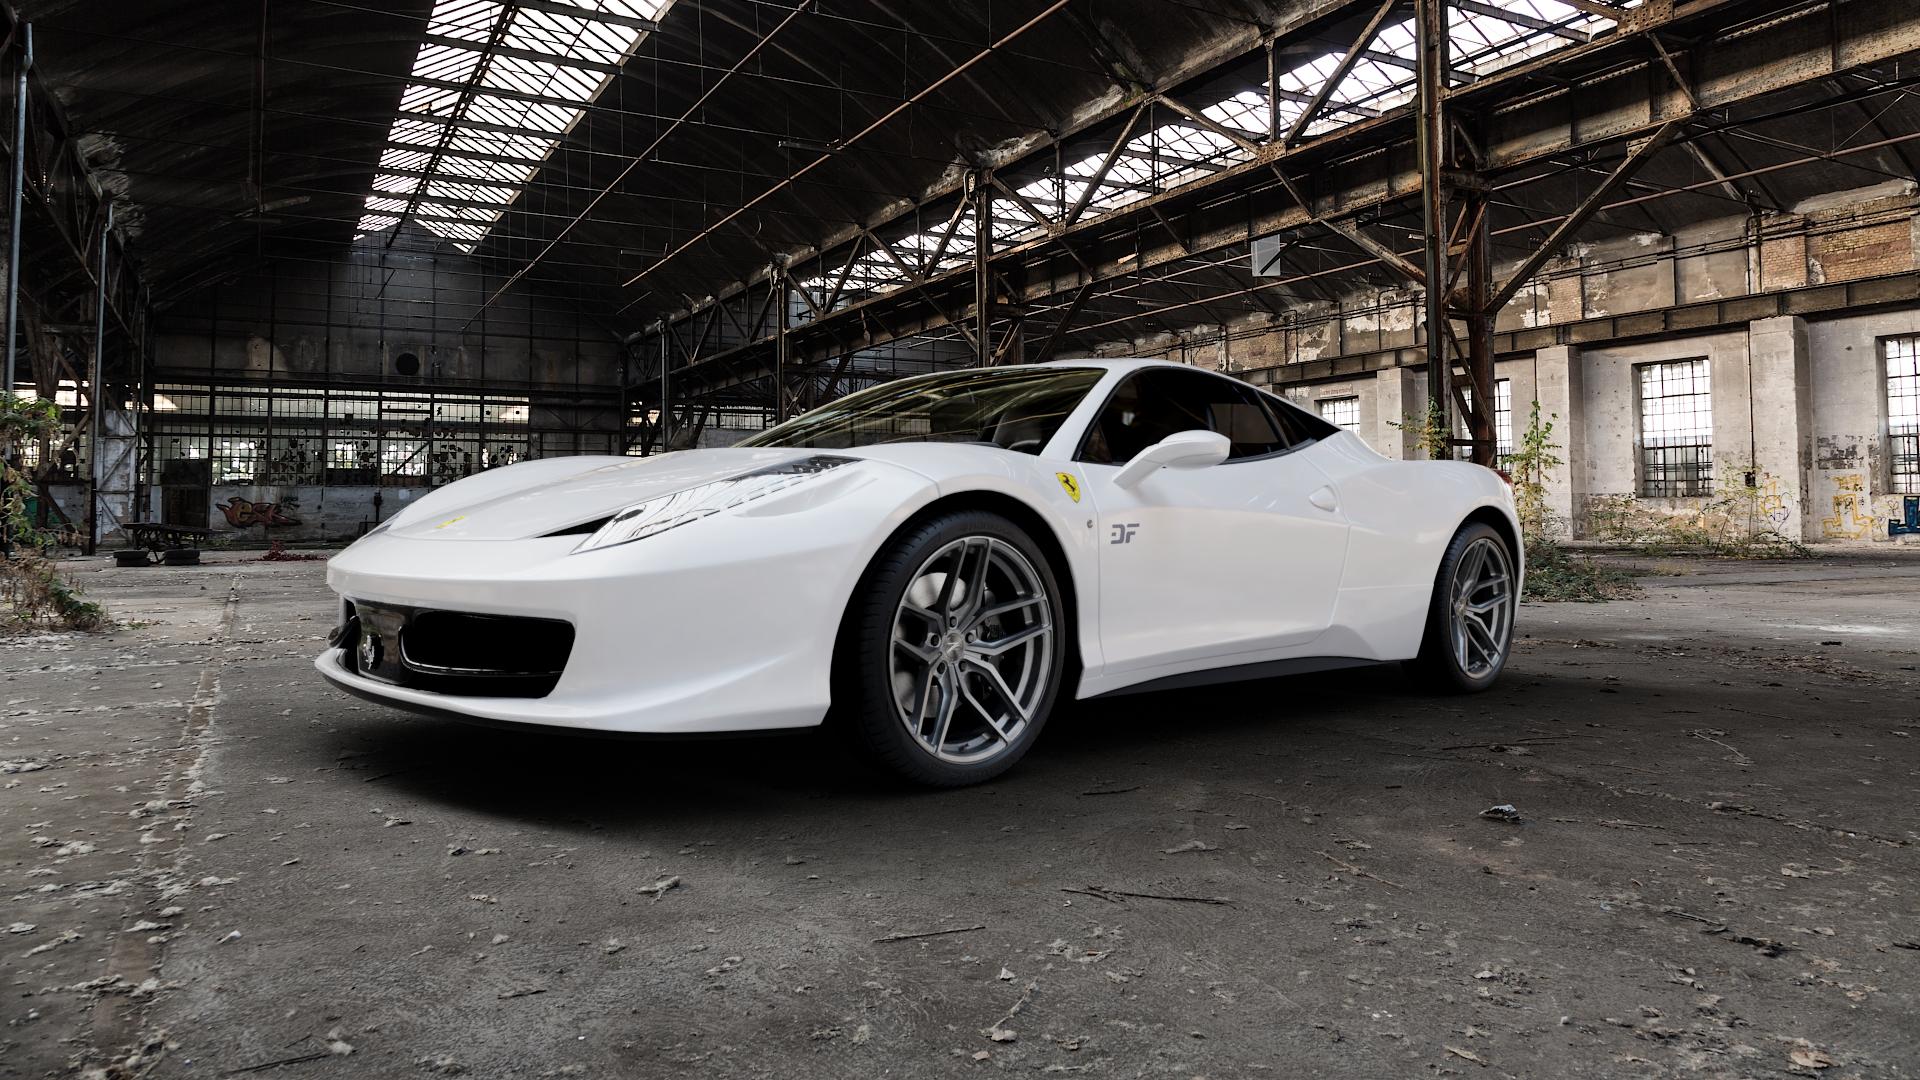 Ferrari 458 Italia 4,5l 441kW Speciale (600 hp) Wheels and Tyre Packages